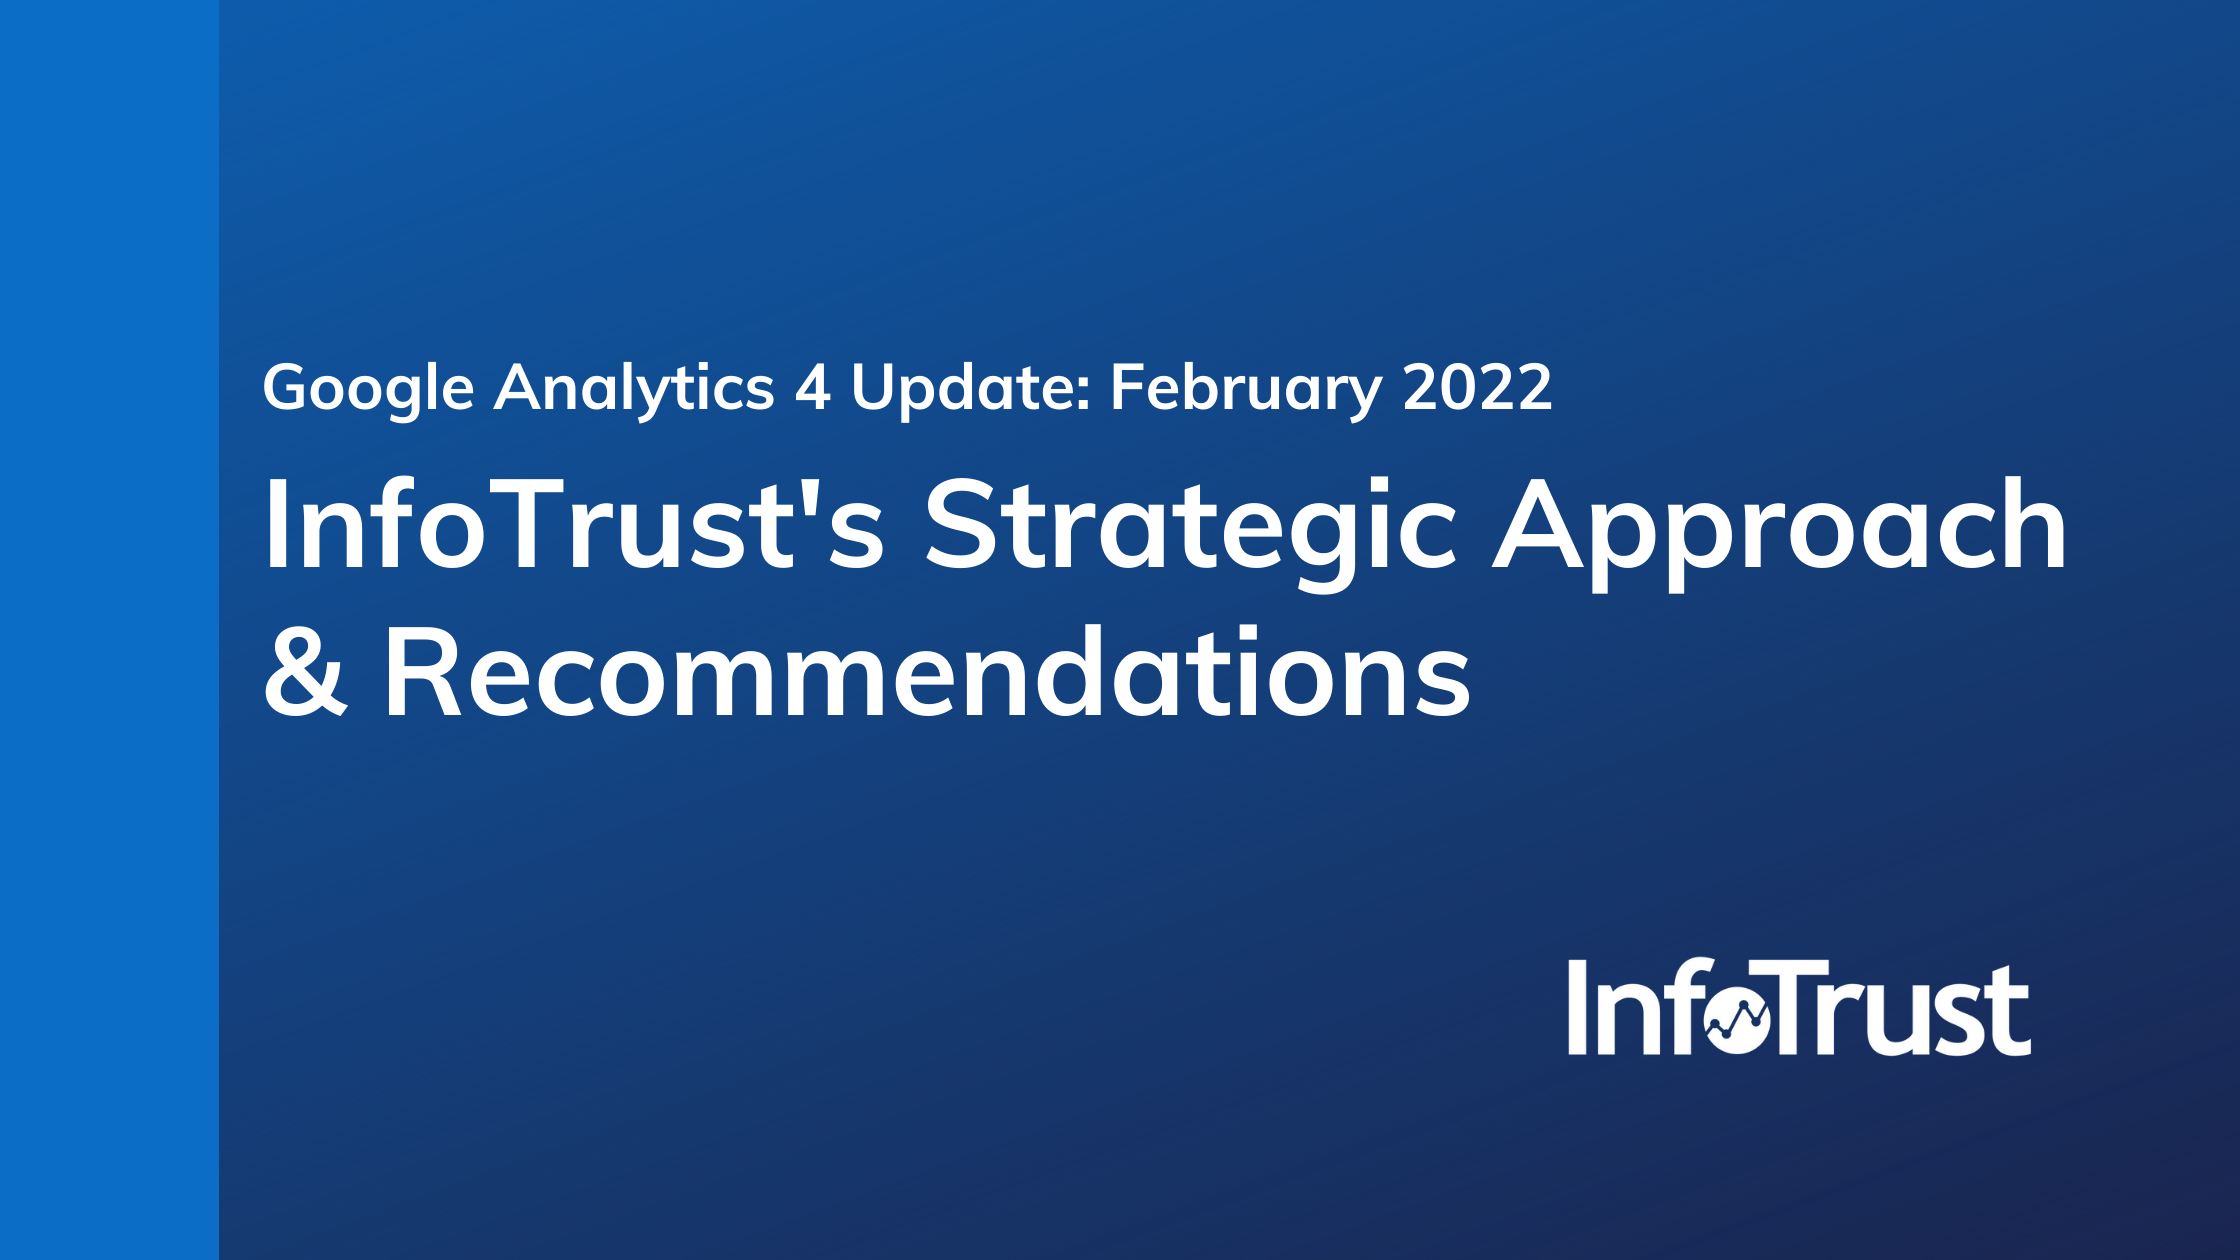 Google Analytics 4 Update: February 2022 - InfoTrust’s Strategic Approach & Recommendations